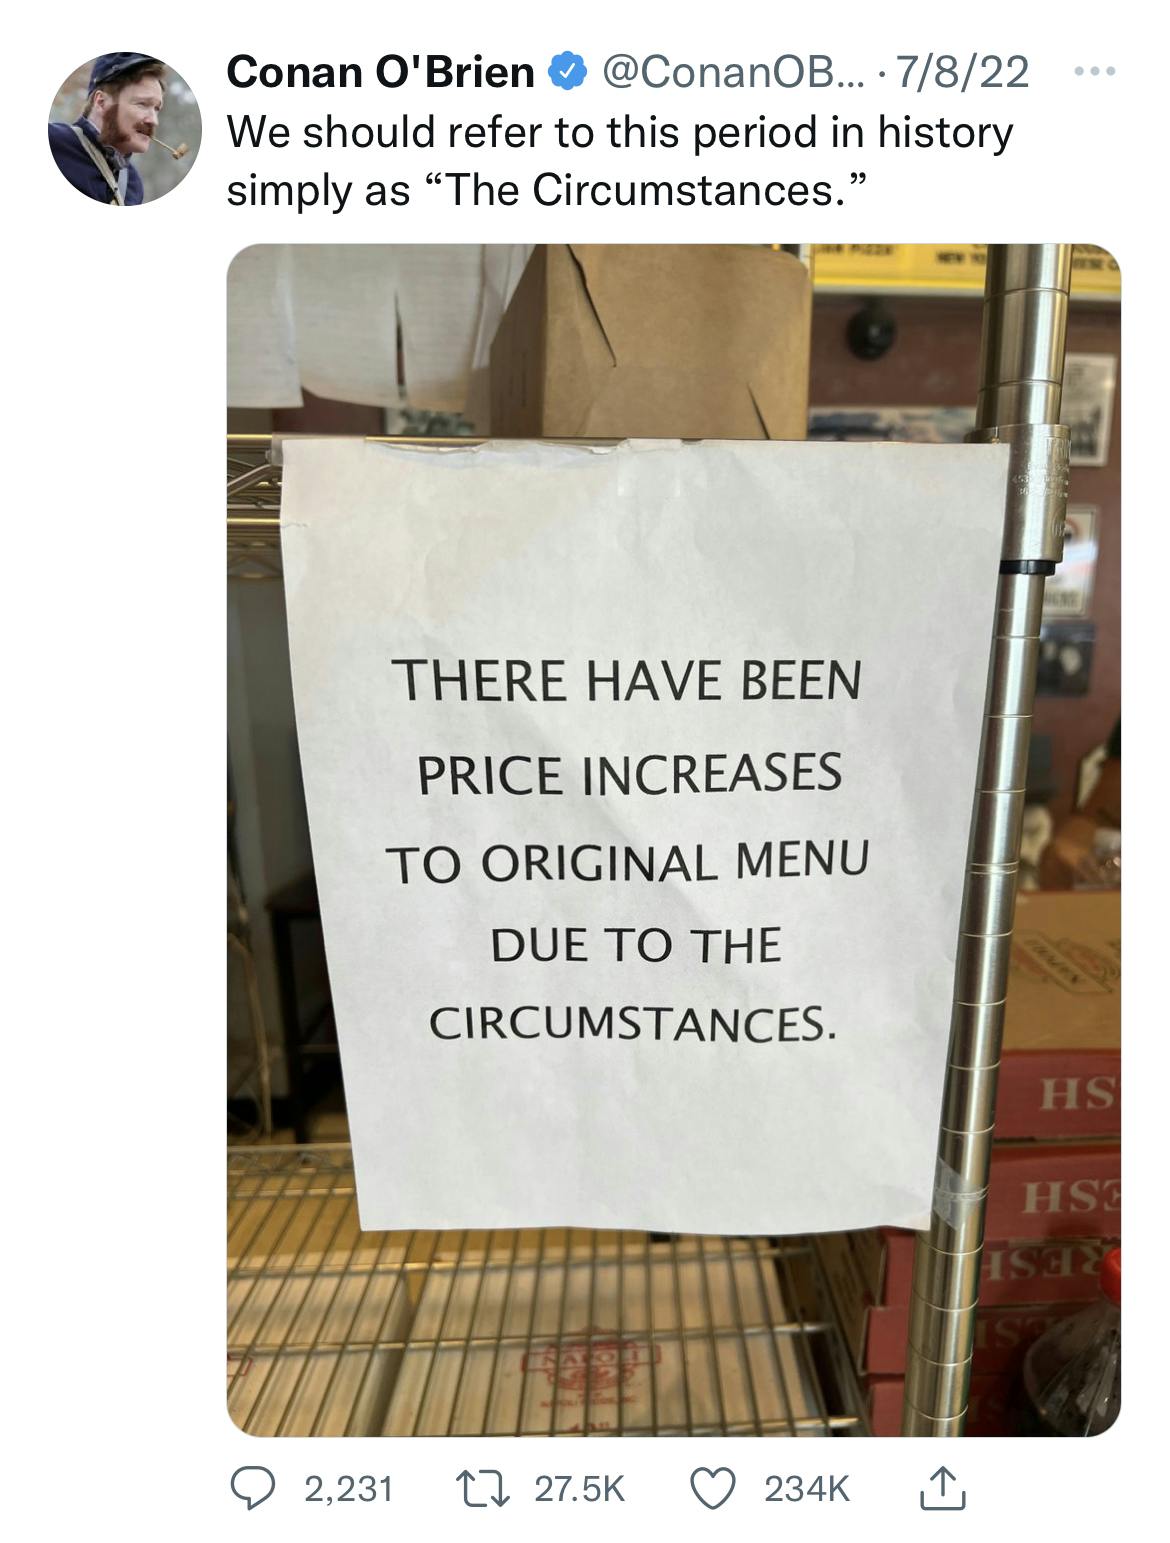 "There have been price increases to original menu due to the circumstances."